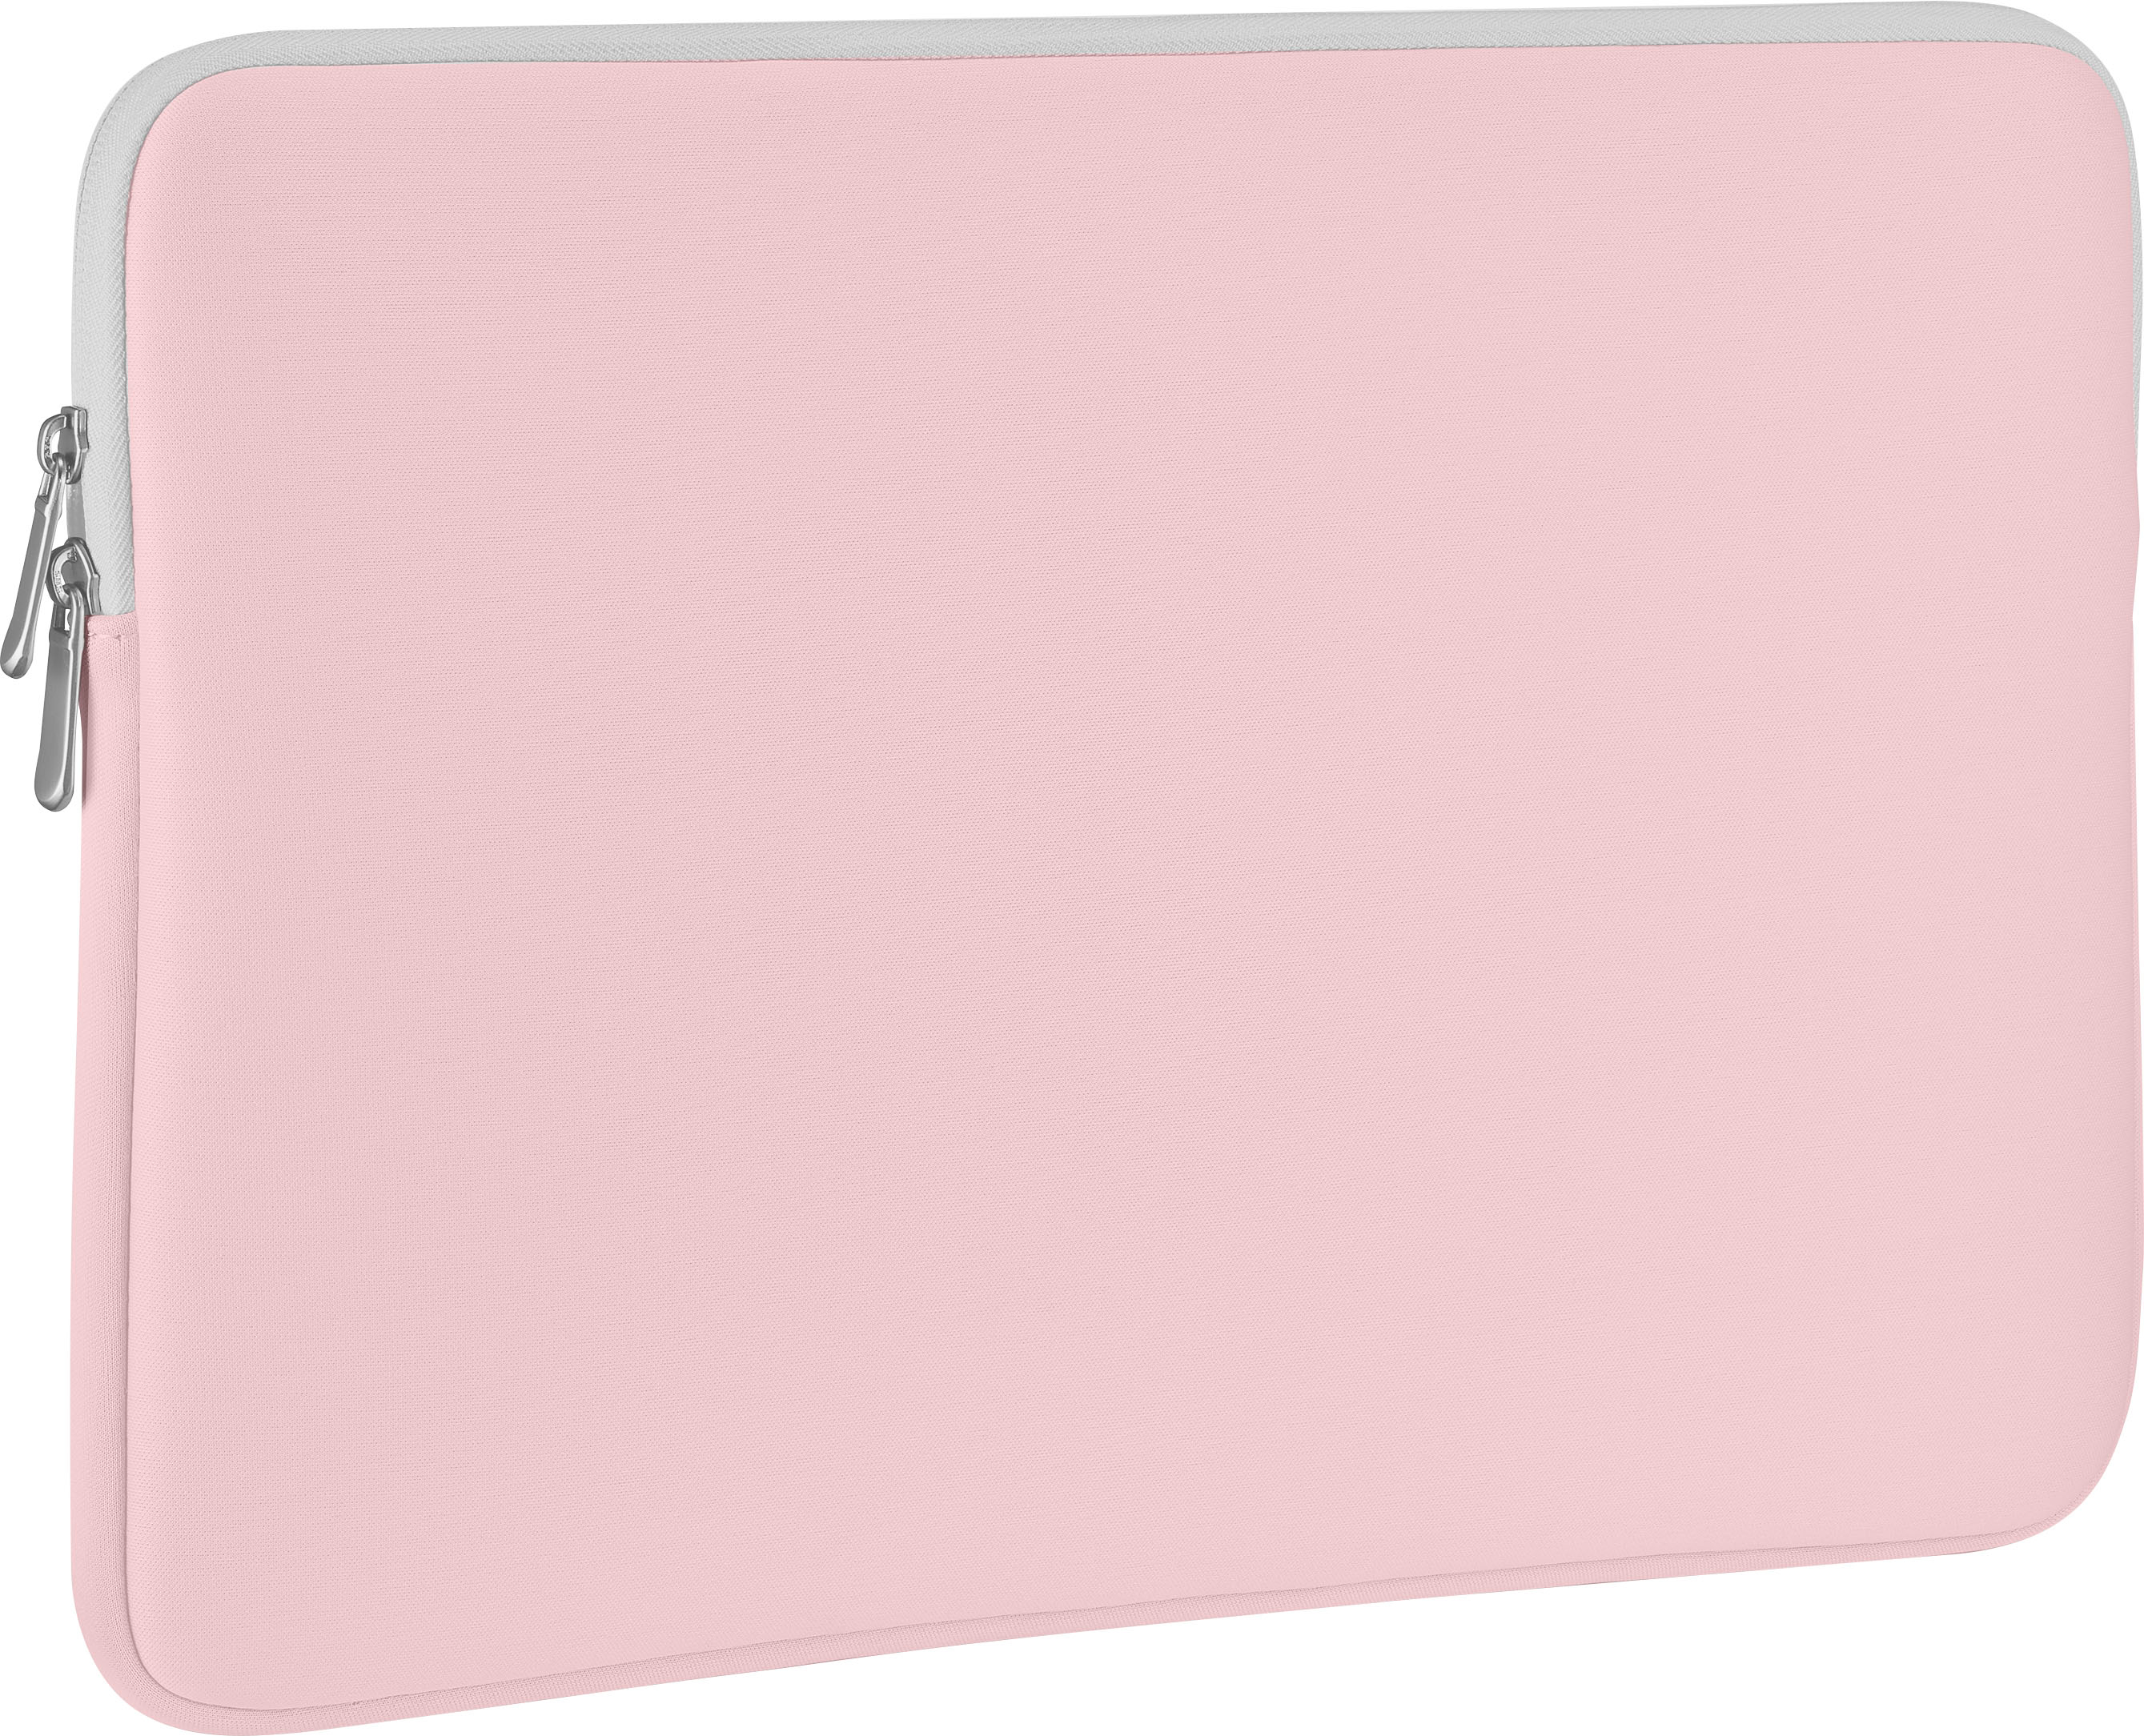 Stimulans groet aardbeving Modal™ Laptop Sleeve for Most Laptops Up to 16” Pink MD-LS16BLSH - Best Buy